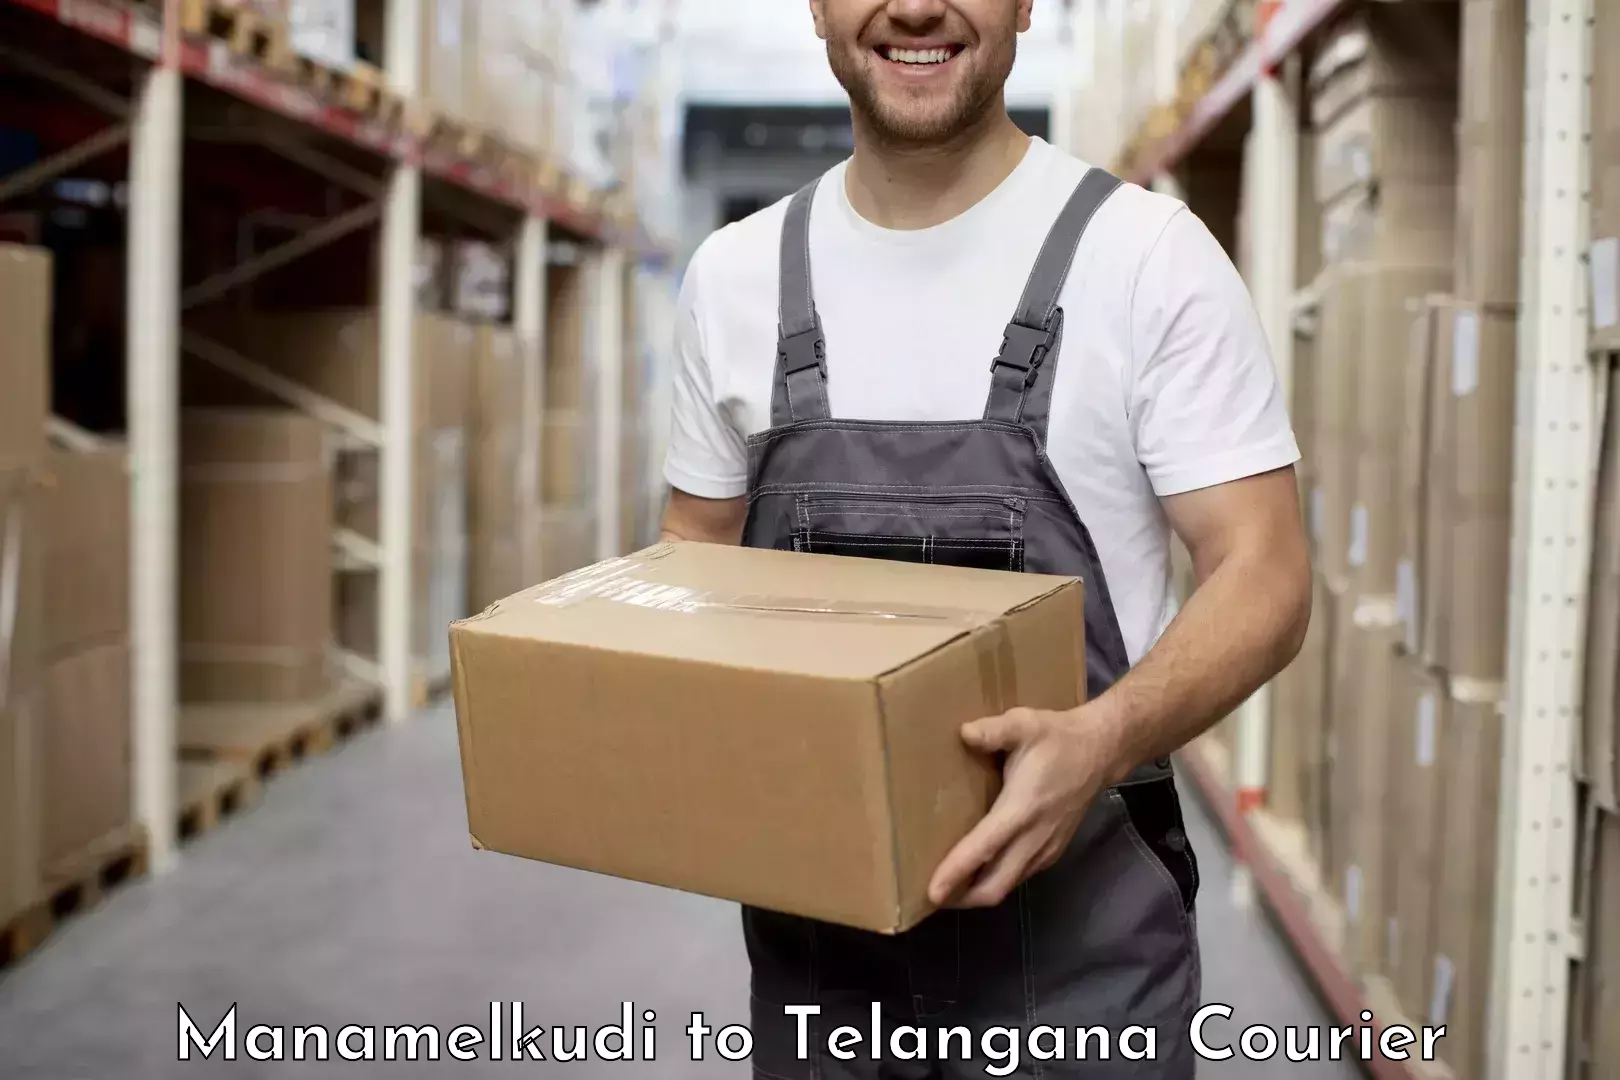 Online package tracking in Manamelkudi to Chennur